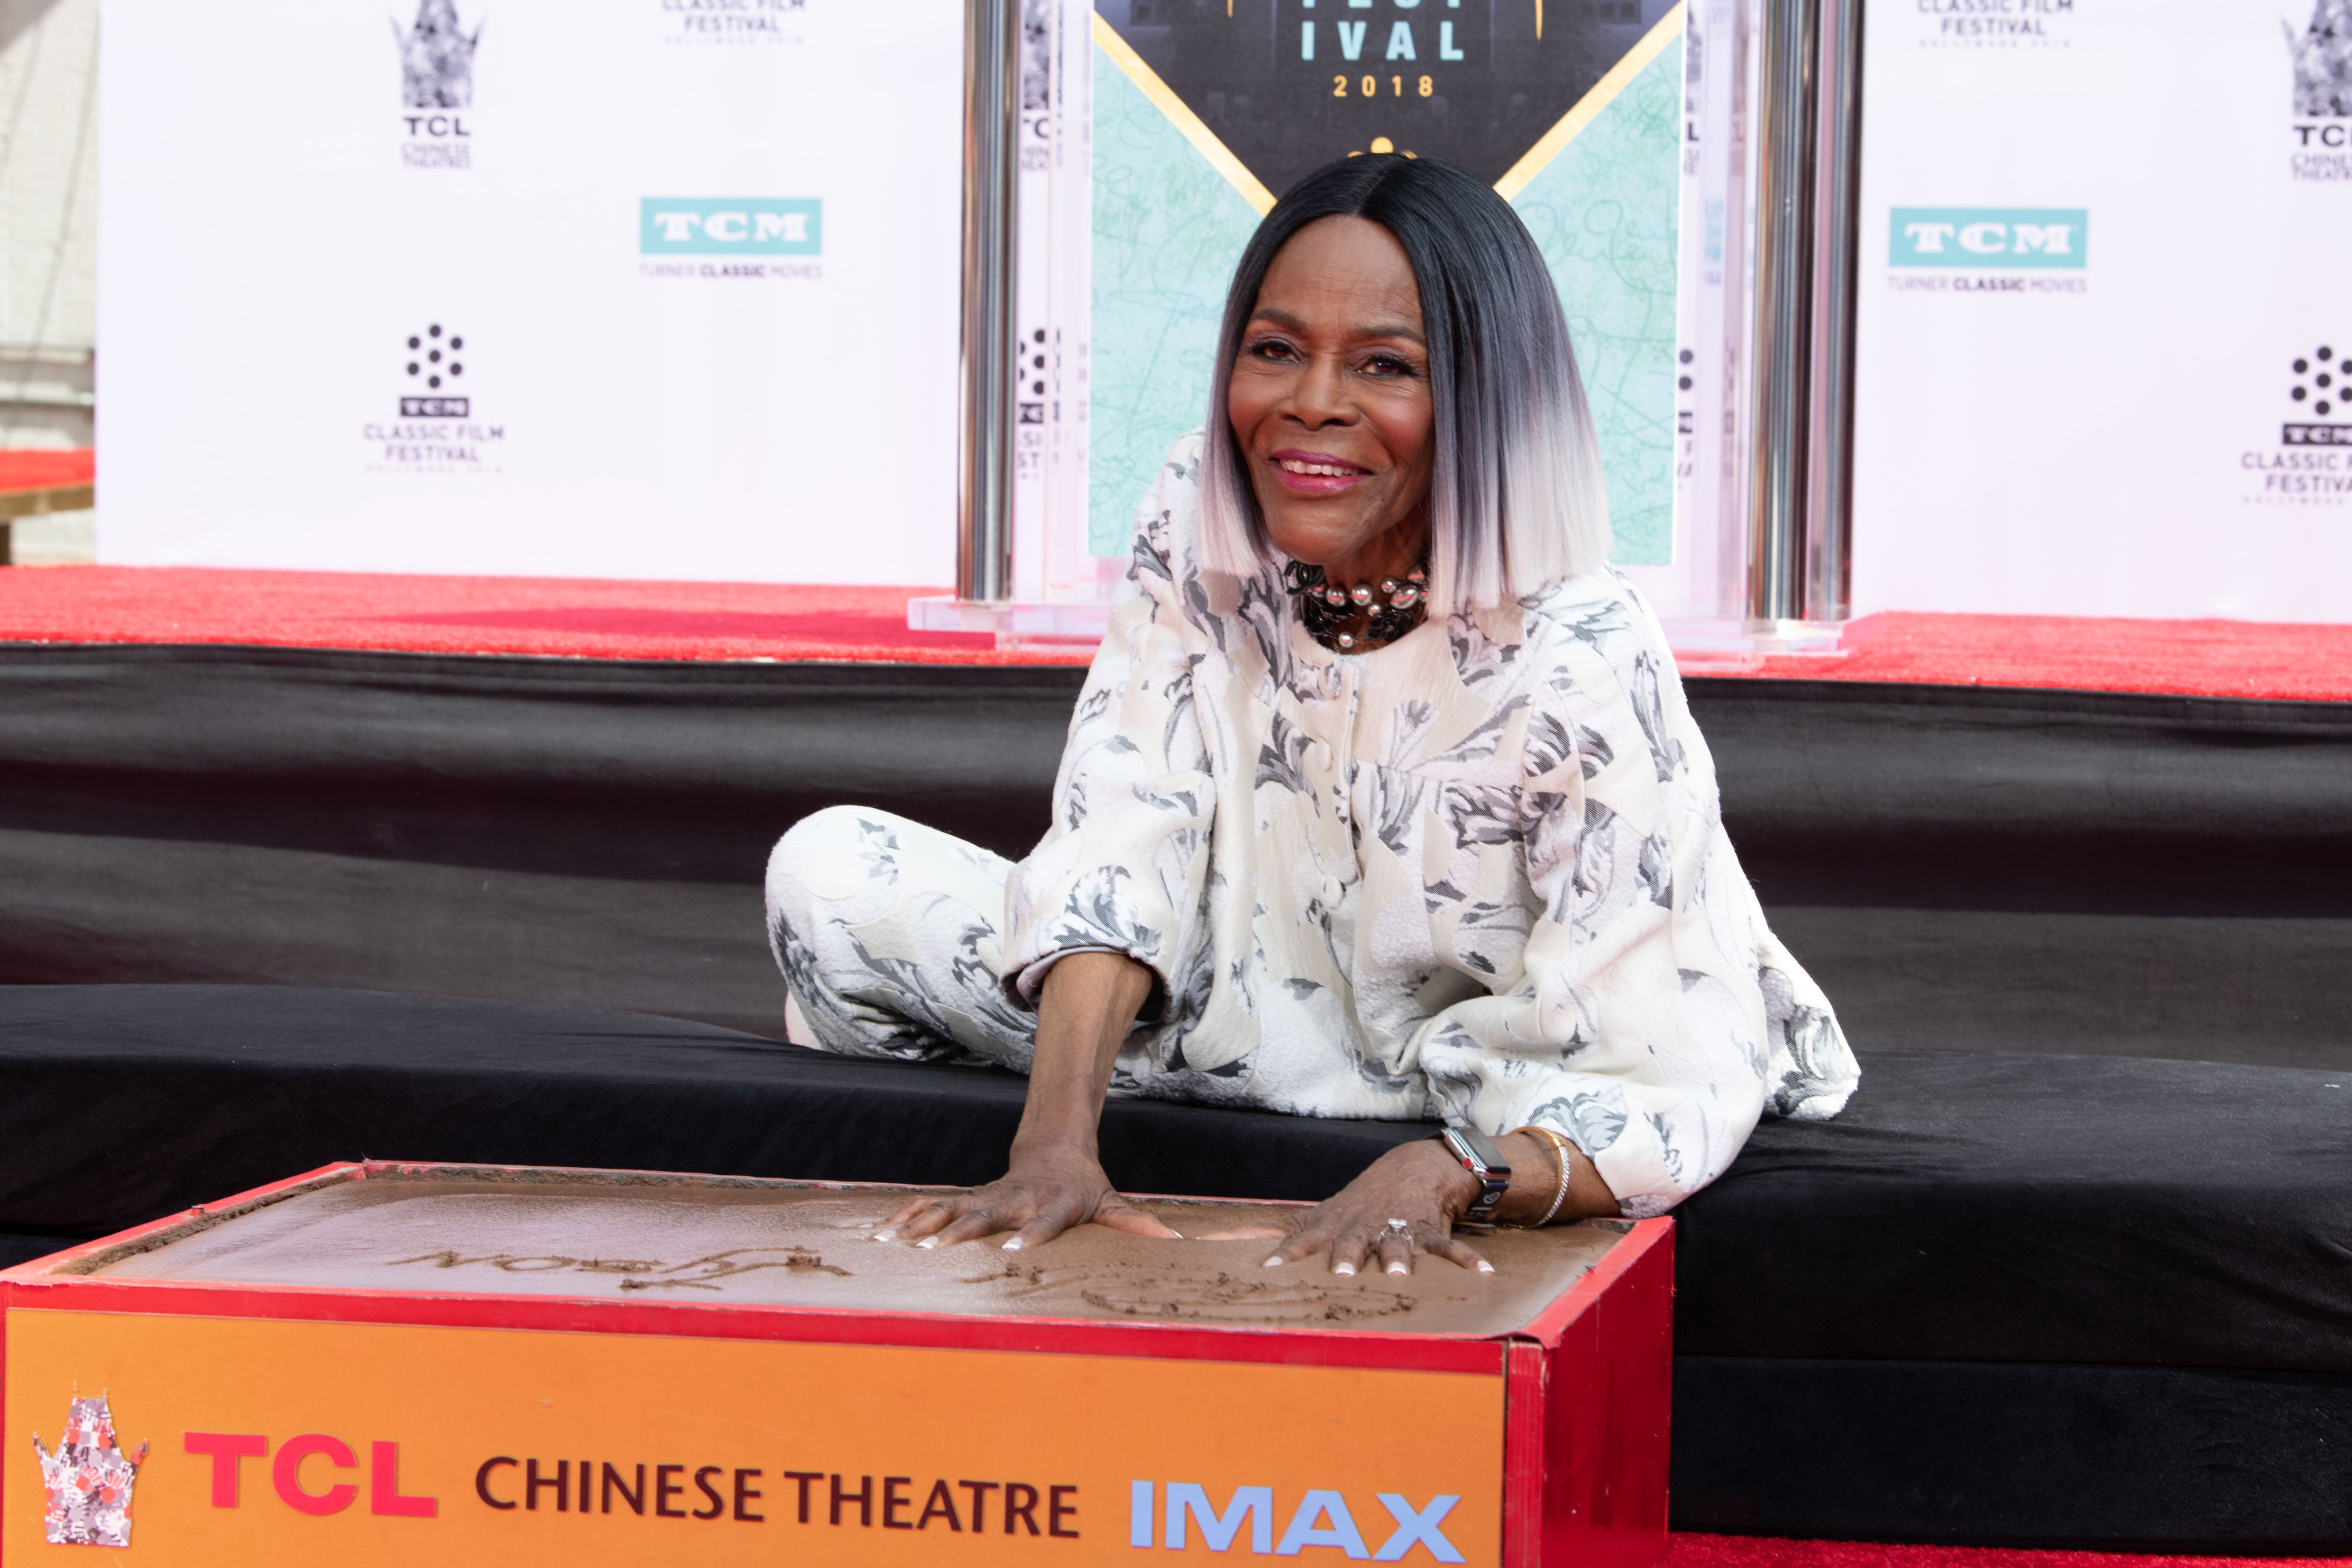 Cicely Tyson, Janelle Monae, Idris Elba and More Celebs Out and About
